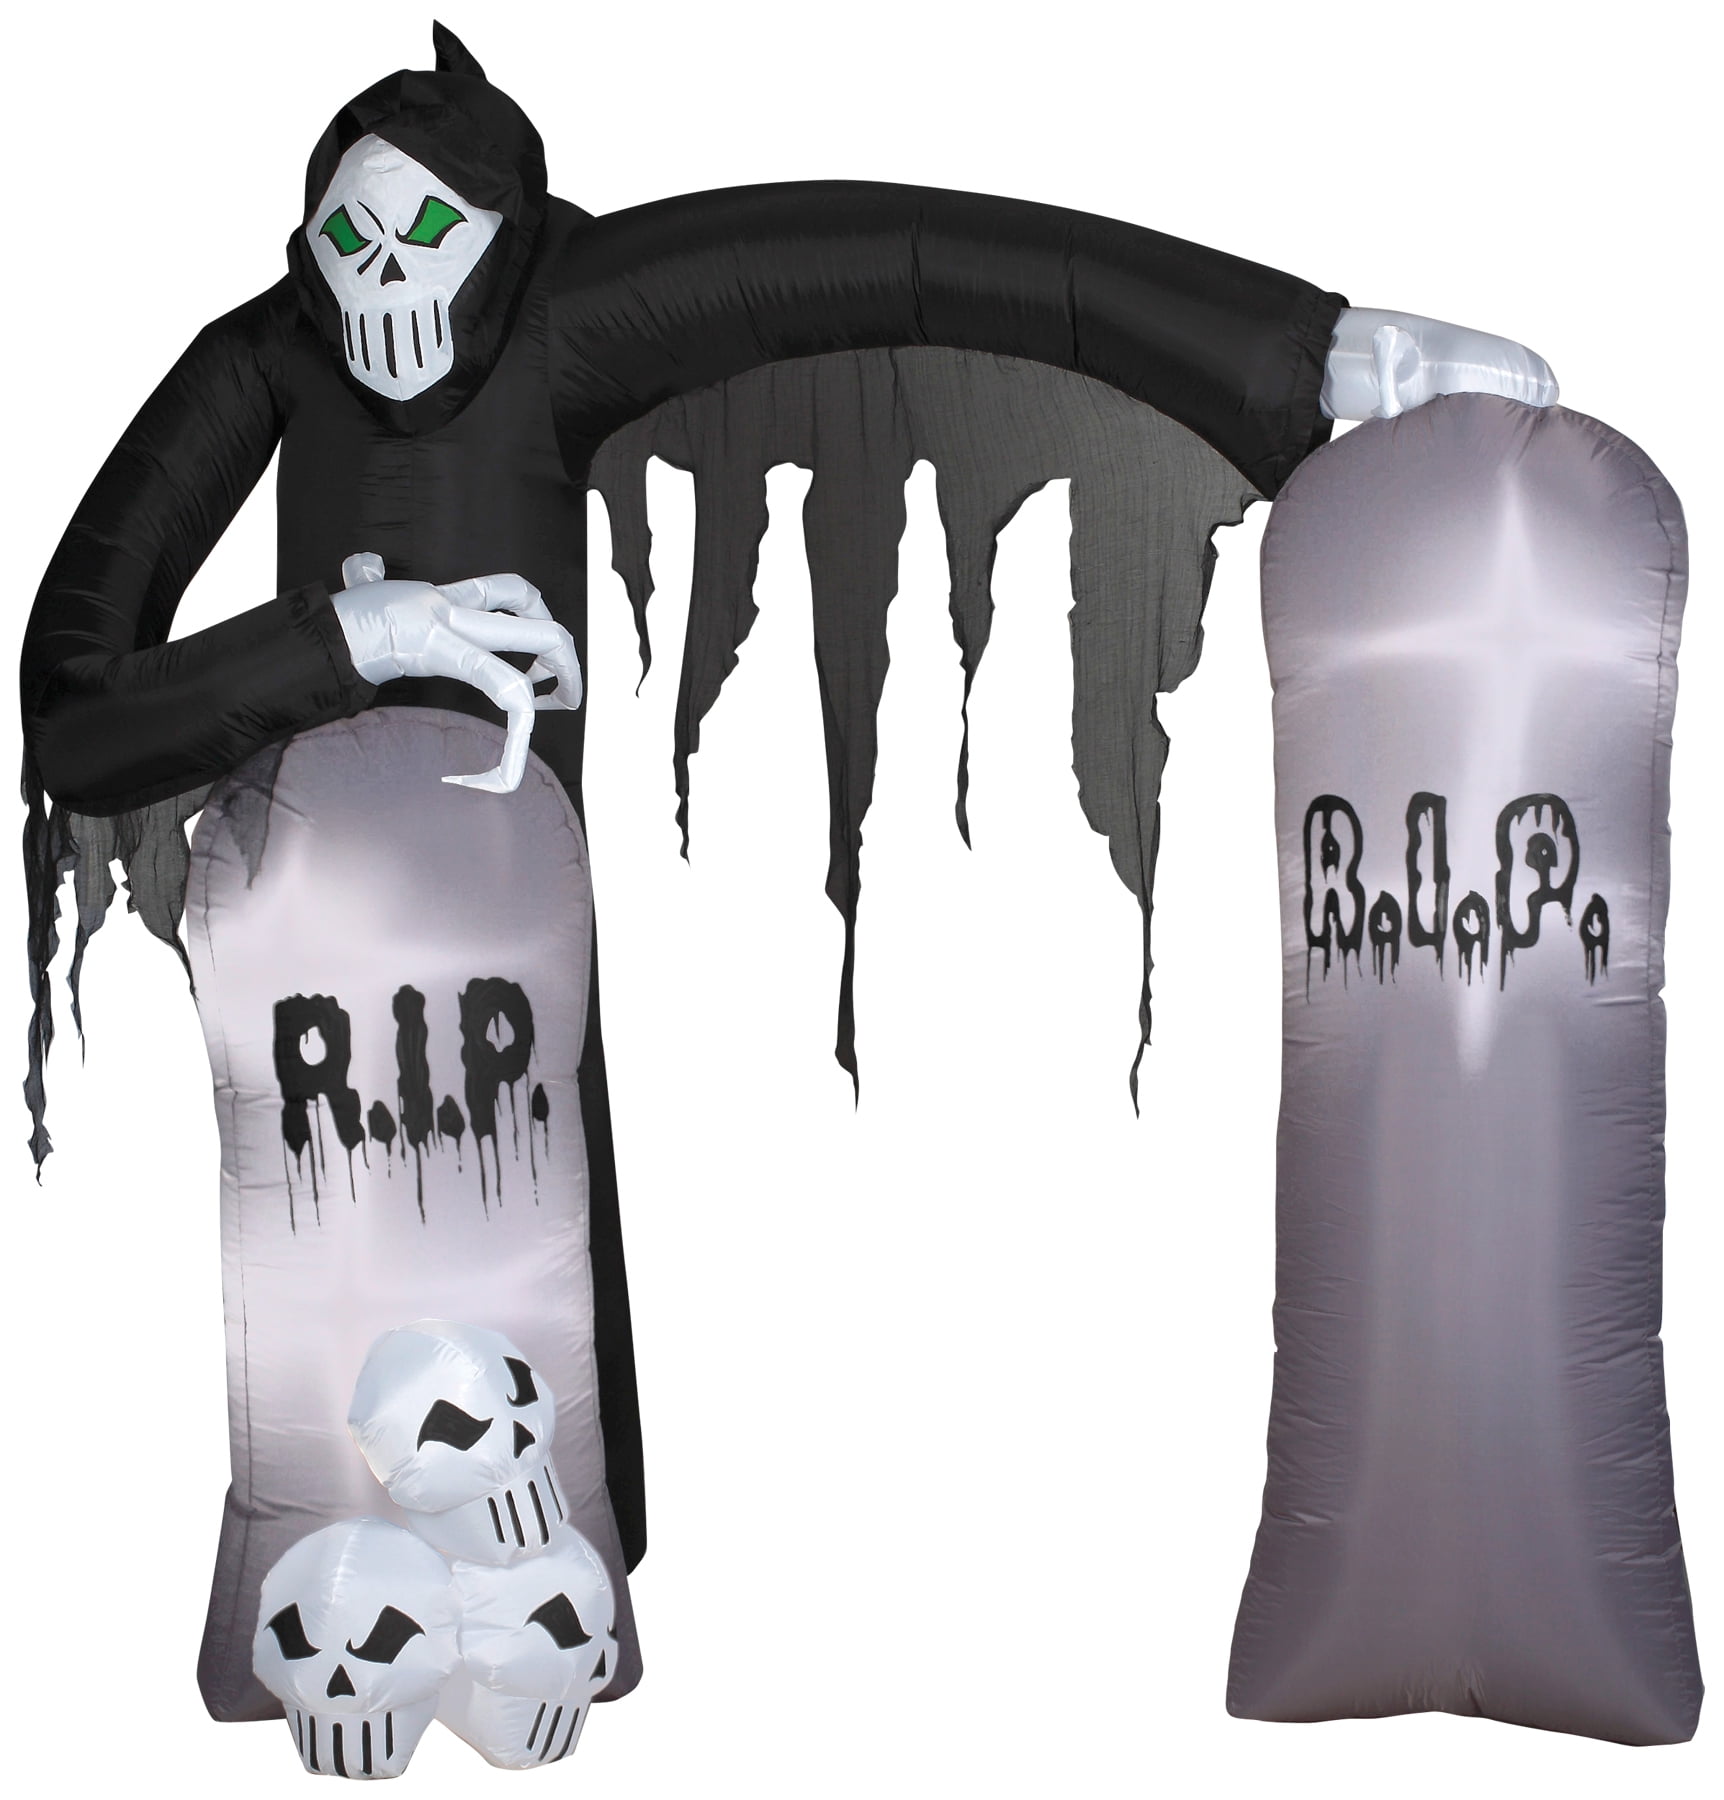 New Reaper Archway Inflatable Airblown Yard Decoration Halloween Prop Gemmy 